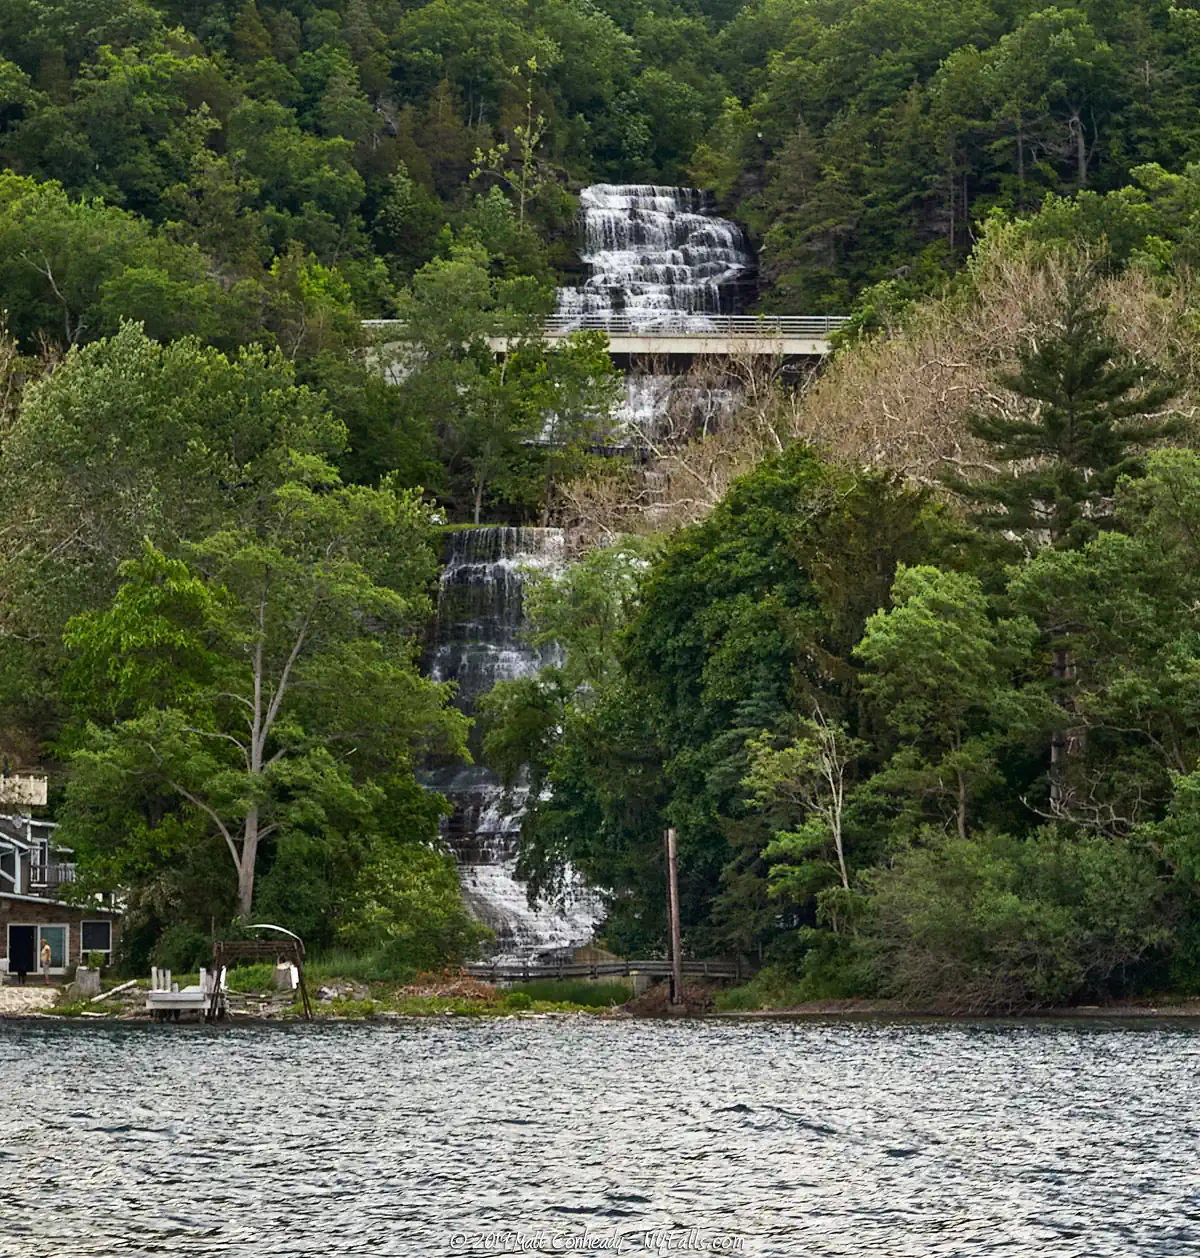 A view of Hector Falls seen from Seneca Lake. NY-414 crosses over the upper portion of the falls.